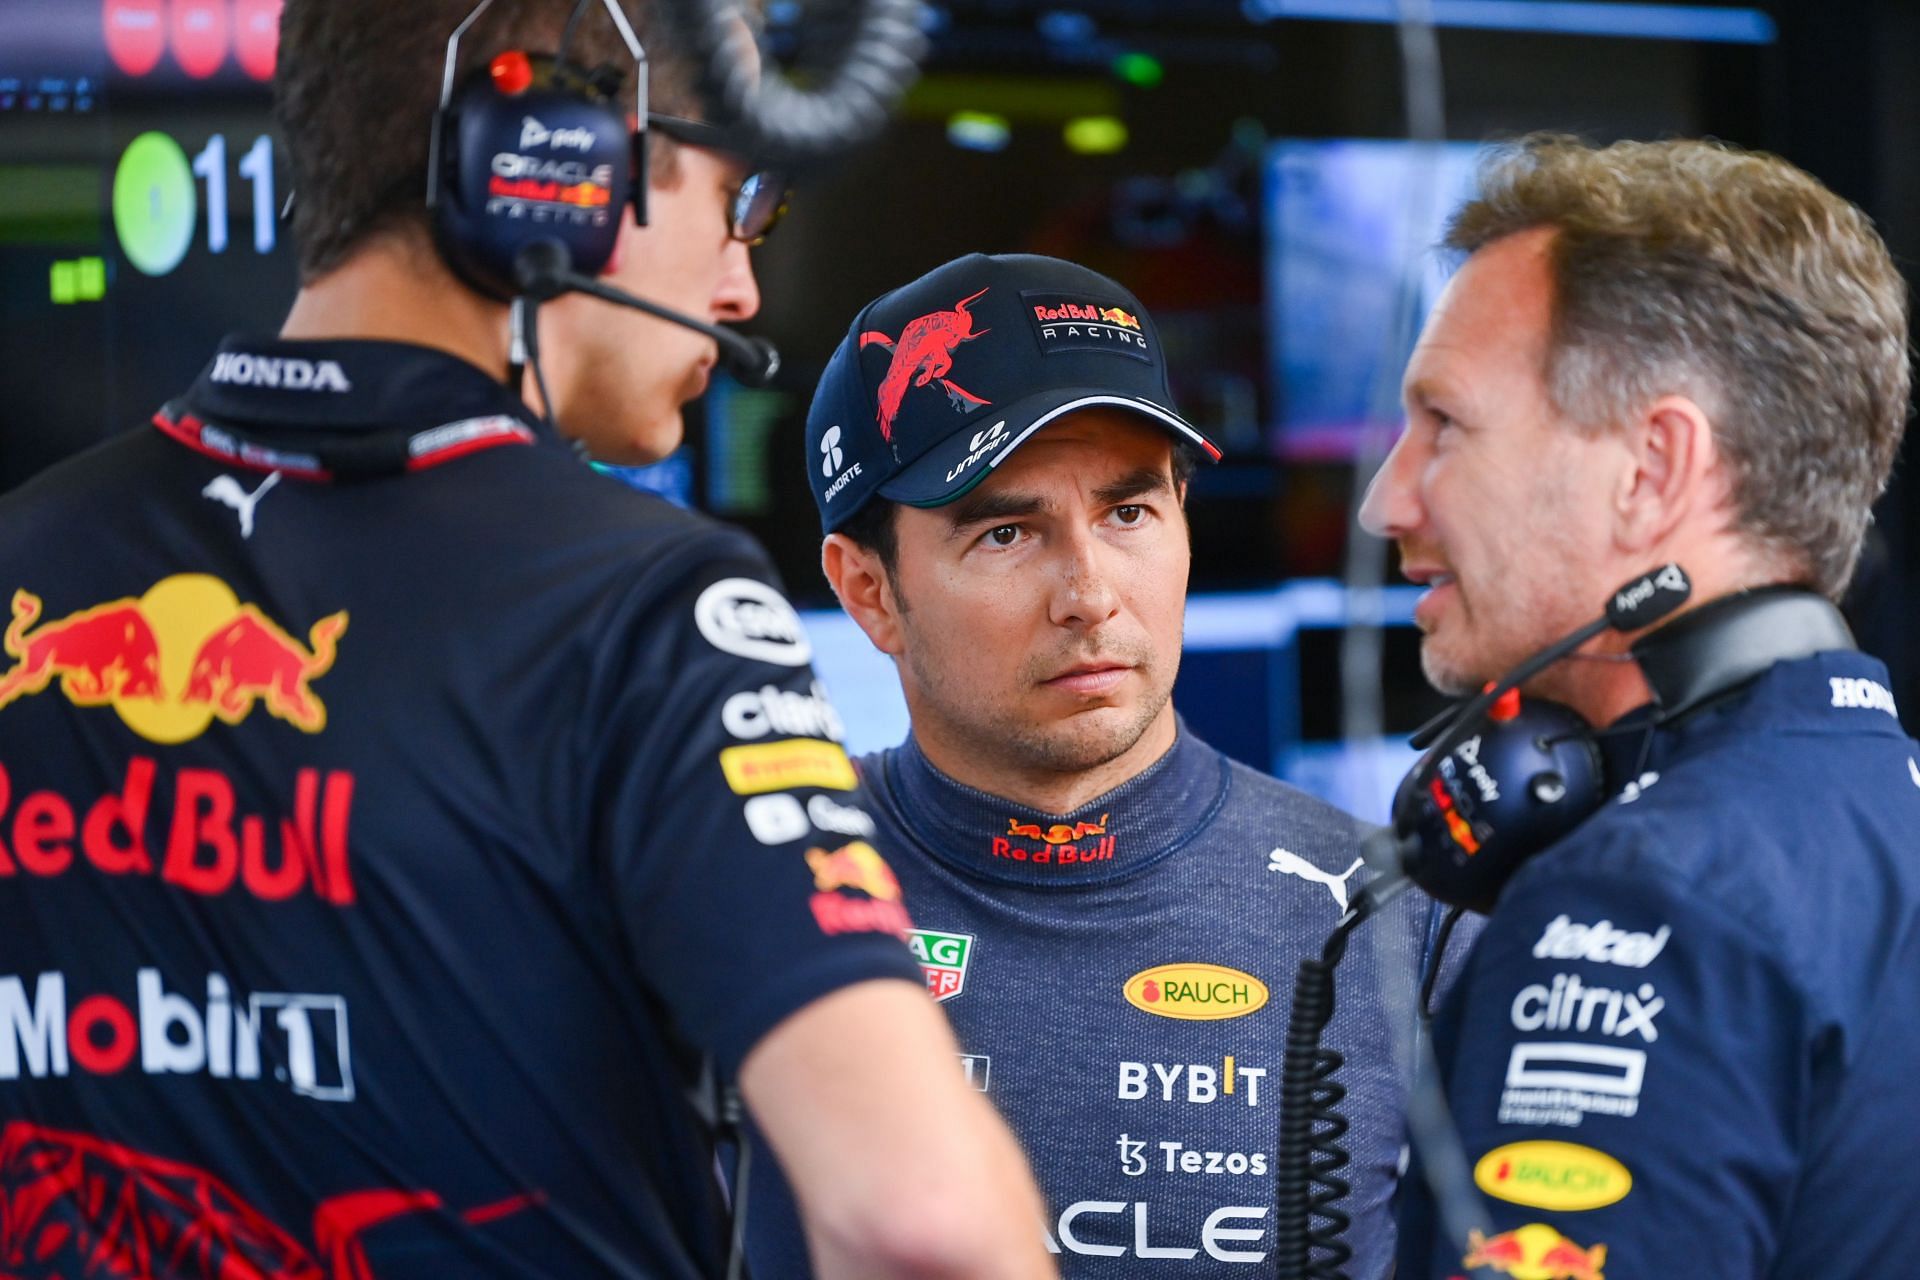 Sergio Perez (middle) and Christian Horner (right) during the F1 Grand Prix of Azerbaijan - Final Practice